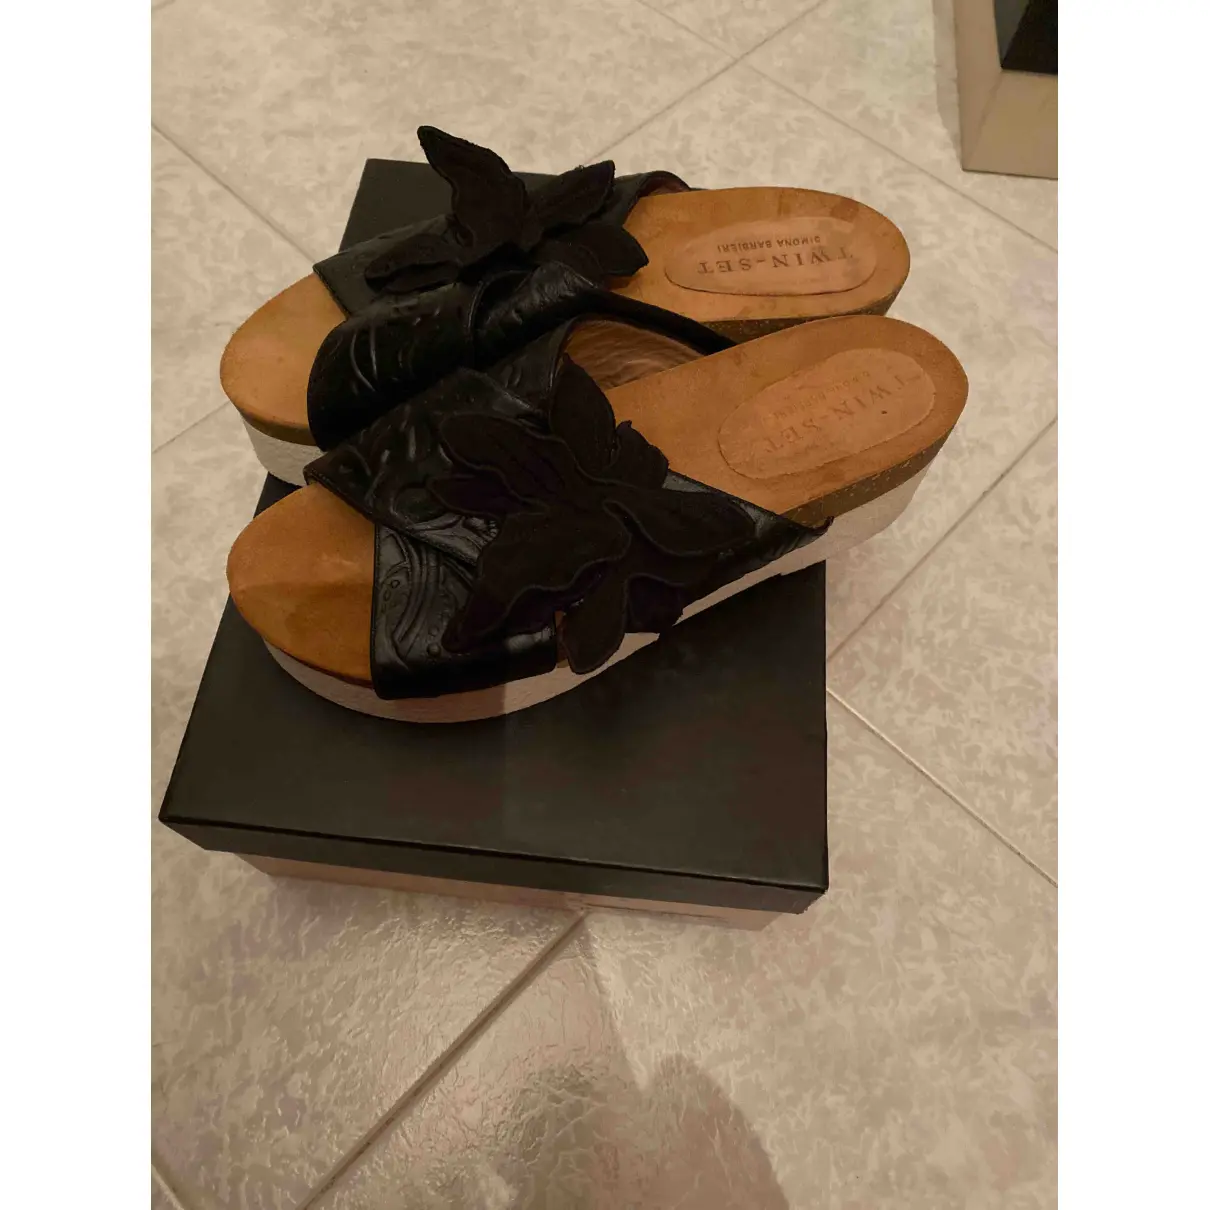 Buy Twinset Leather mules online